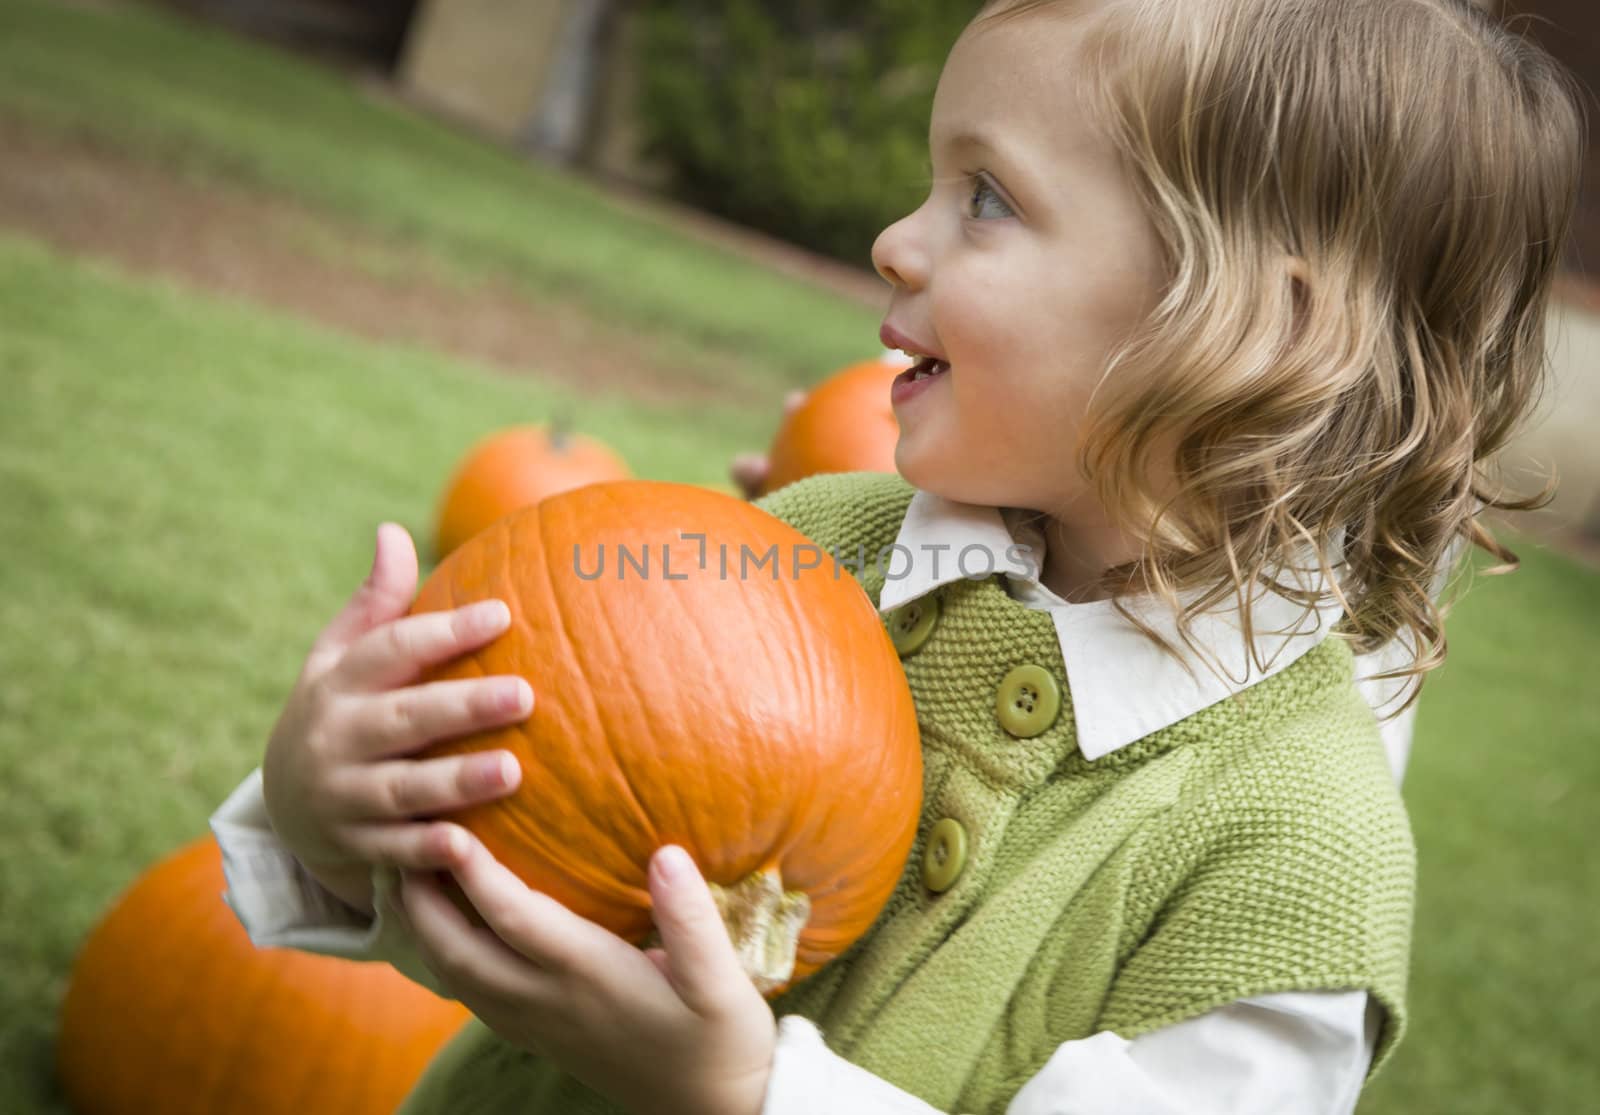 Adorable Young Child Girl Enjoying the Pumpkins at the Pumpkin Patch.